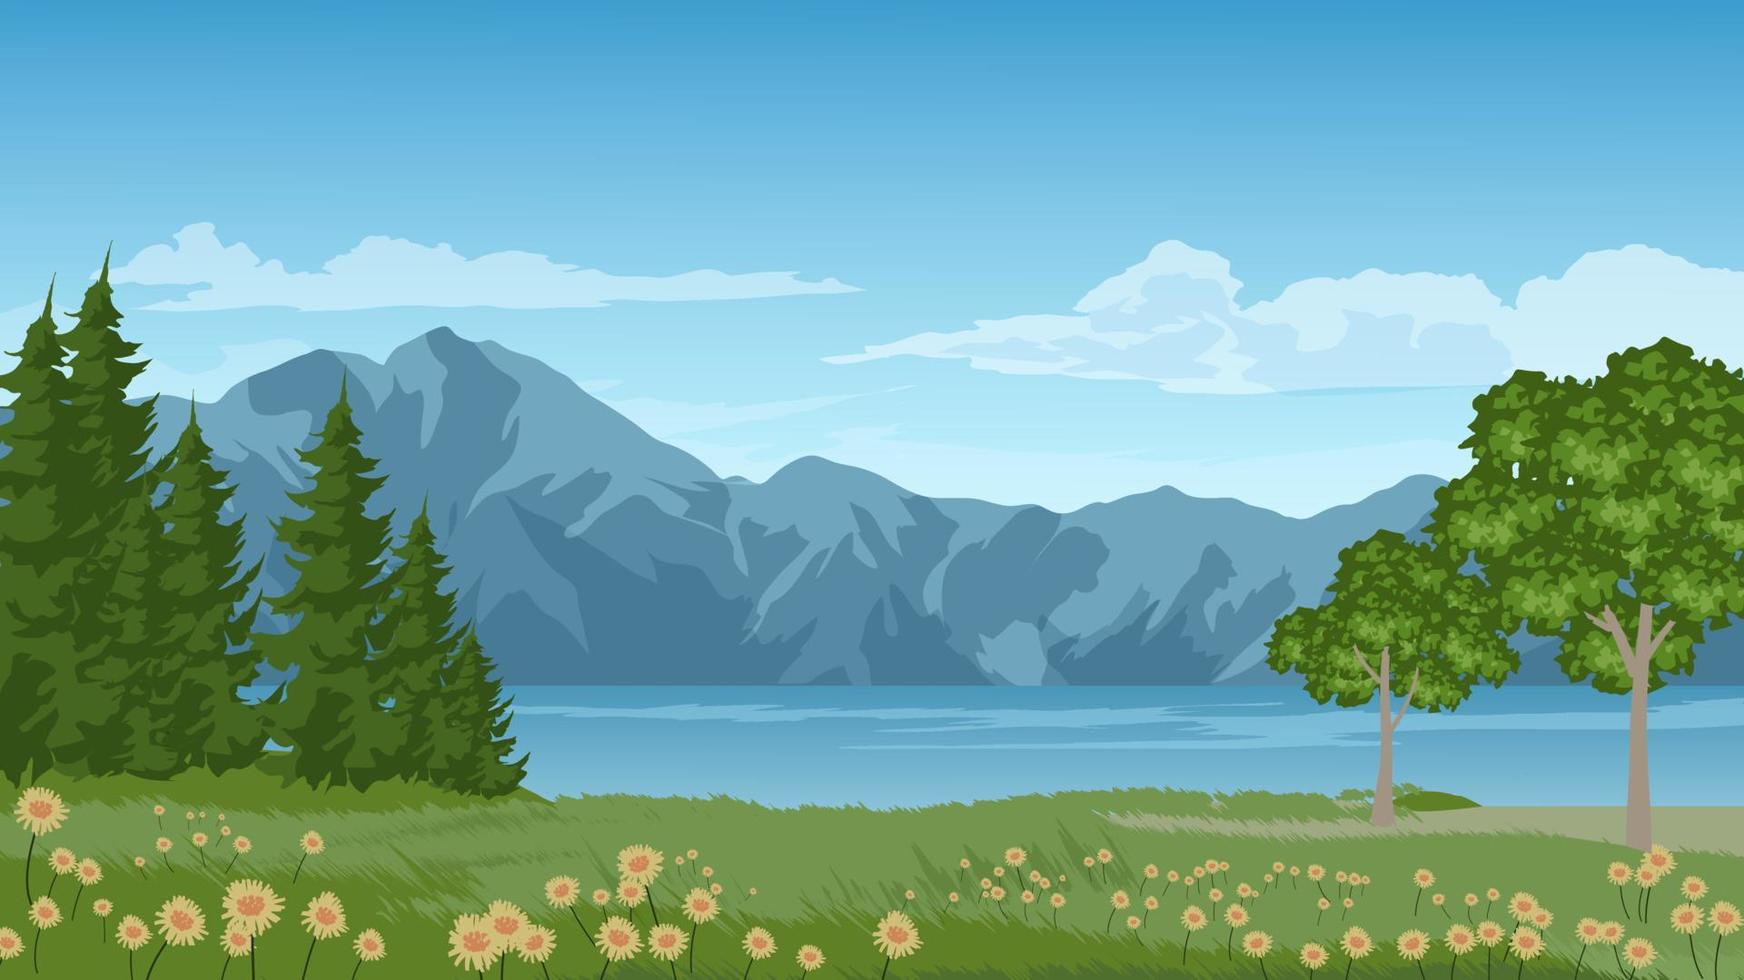 Landscape with mountain, lake, trees in grassland with flowers vector